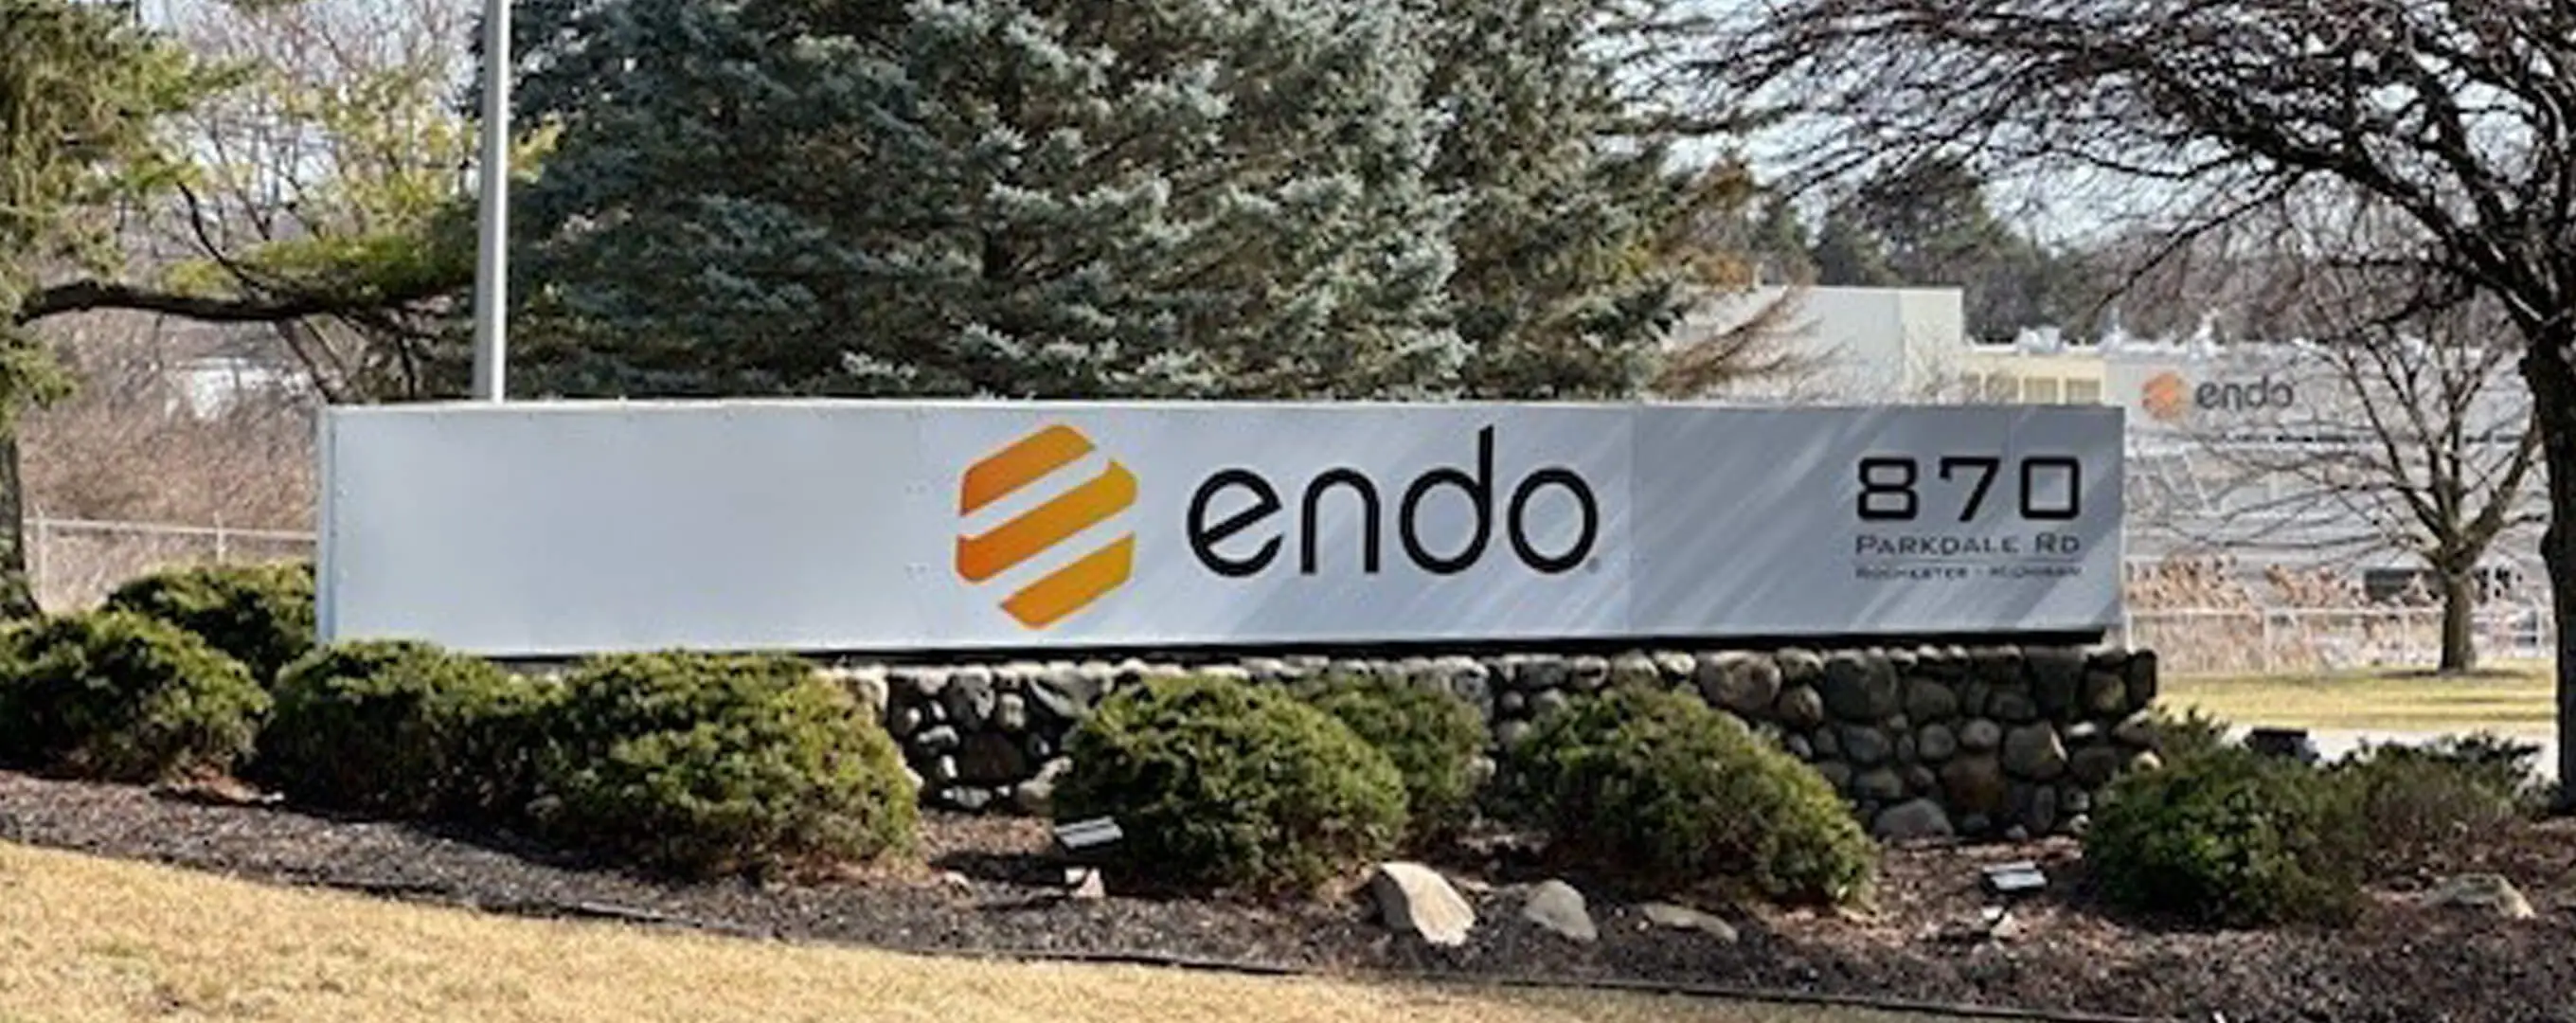 Company sign at Endo corporate